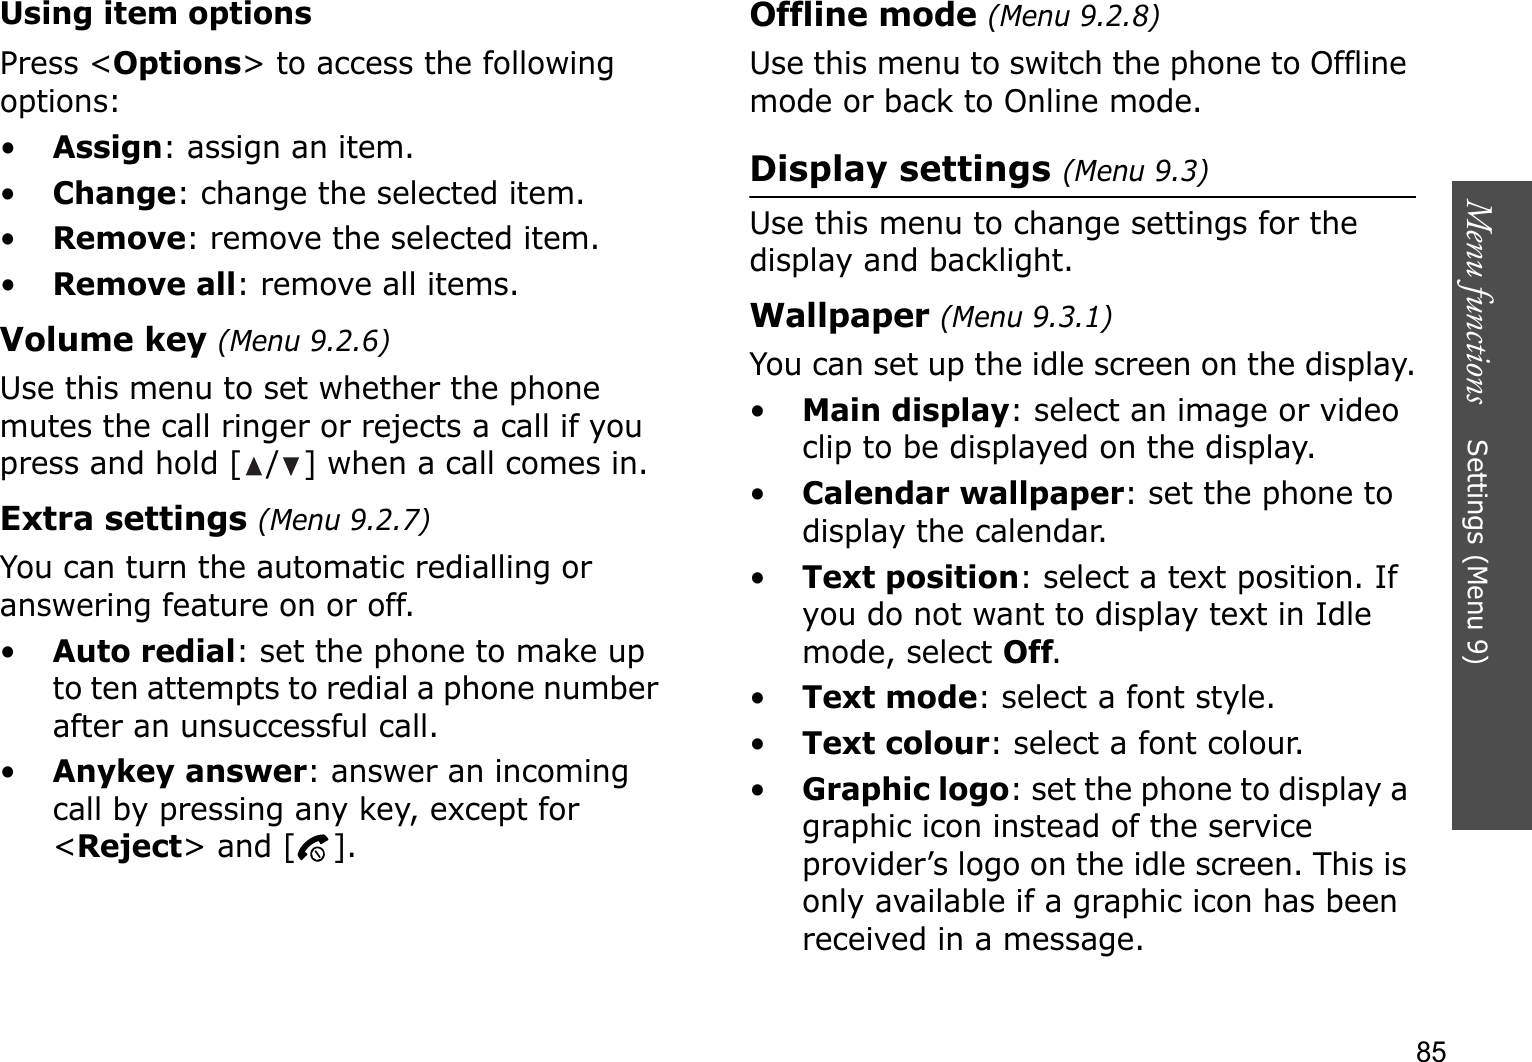 Menu functions    Settings (Menu 9)85Using item optionsPress &lt;Options&gt; to access the following options:•Assign: assign an item.•Change: change the selected item.•Remove: remove the selected item.•Remove all: remove all items.Volume key (Menu 9.2.6)Use this menu to set whether the phone mutes the call ringer or rejects a call if you press and hold [ / ] when a call comes in.Extra settings (Menu 9.2.7)You can turn the automatic redialling or answering feature on or off.•Auto redial: set the phone to make up to ten attempts to redial a phone number after an unsuccessful call.•Anykey answer: answer an incoming call by pressing any key, except for &lt;Reject&gt; and [ ]. Offline mode (Menu 9.2.8)Use this menu to switch the phone to Offline mode or back to Online mode.Display settings (Menu 9.3)Use this menu to change settings for the display and backlight.Wallpaper (Menu 9.3.1)You can set up the idle screen on the display.•Main display: select an image or video clip to be displayed on the display.•Calendar wallpaper: set the phone to display the calendar.•Text position: select a text position. If you do not want to display text in Idle mode, select Off.•Text mode: select a font style.•Text colour: select a font colour.•Graphic logo: set the phone to display a graphic icon instead of the service provider’s logo on the idle screen. This is only available if a graphic icon has been received in a message.